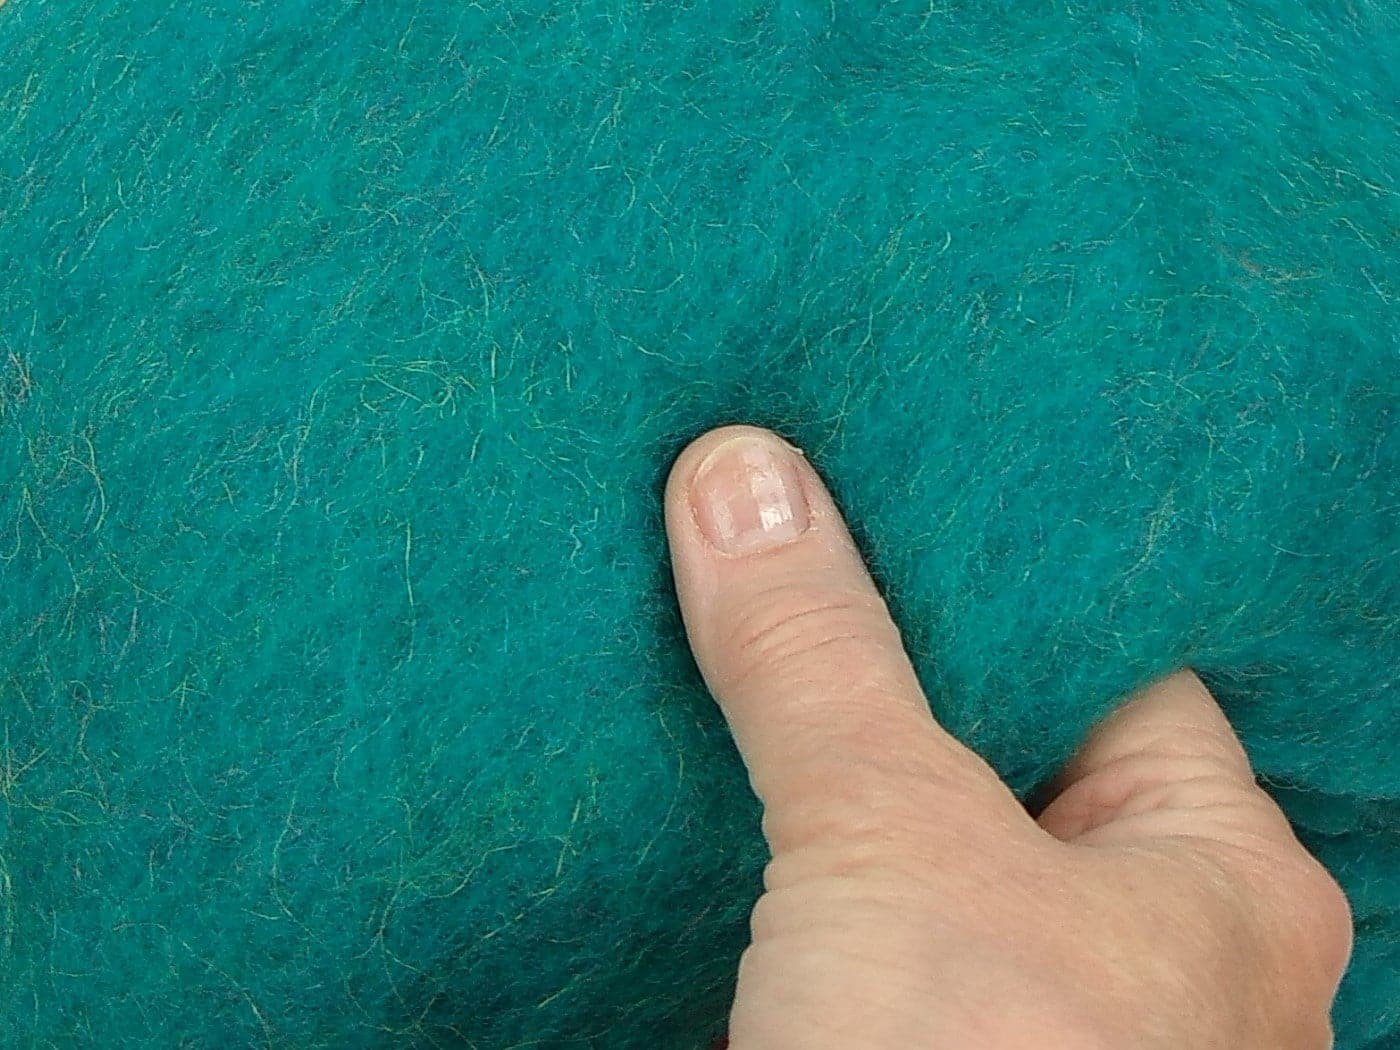 Blue-Green Shimmer - dyed NZ Merino carded wool batts with sparkly fibres - The Makerss